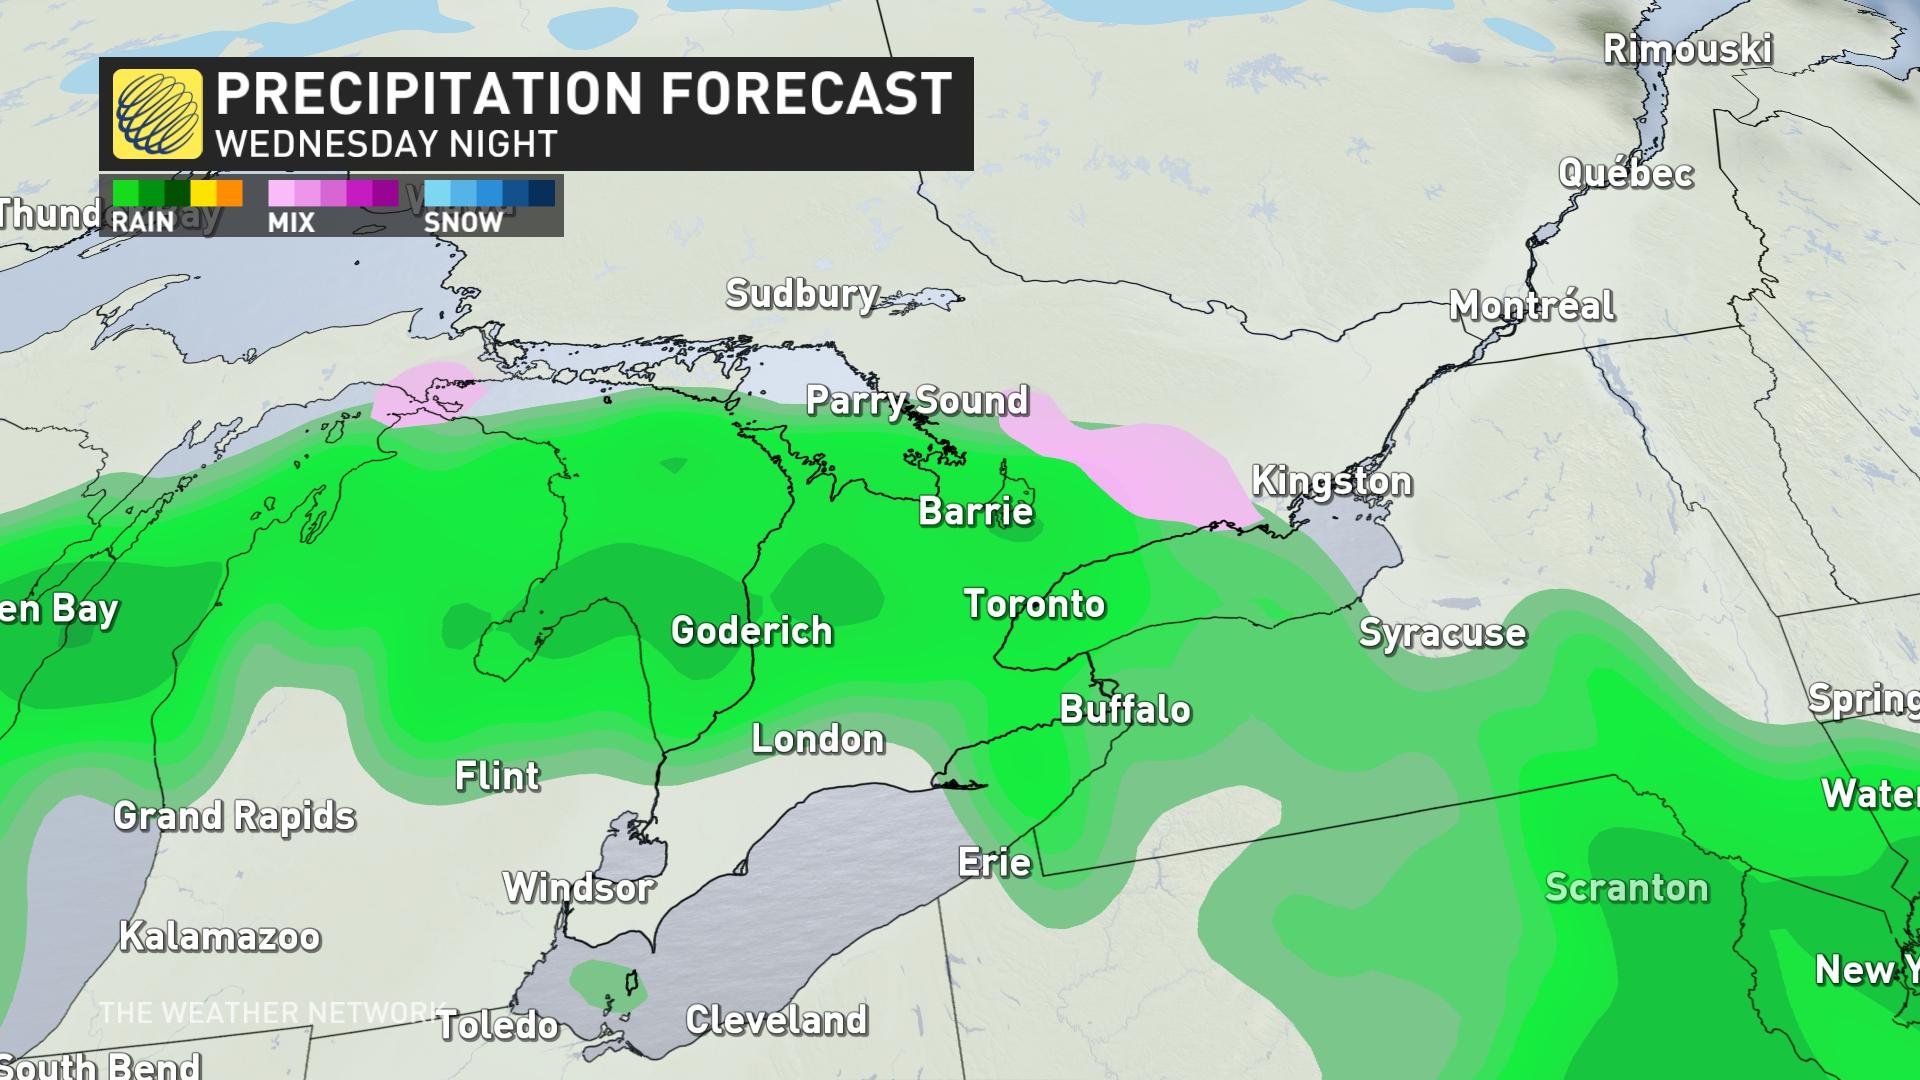 milder air returns to ontario with a burst of messy, disruptive weather